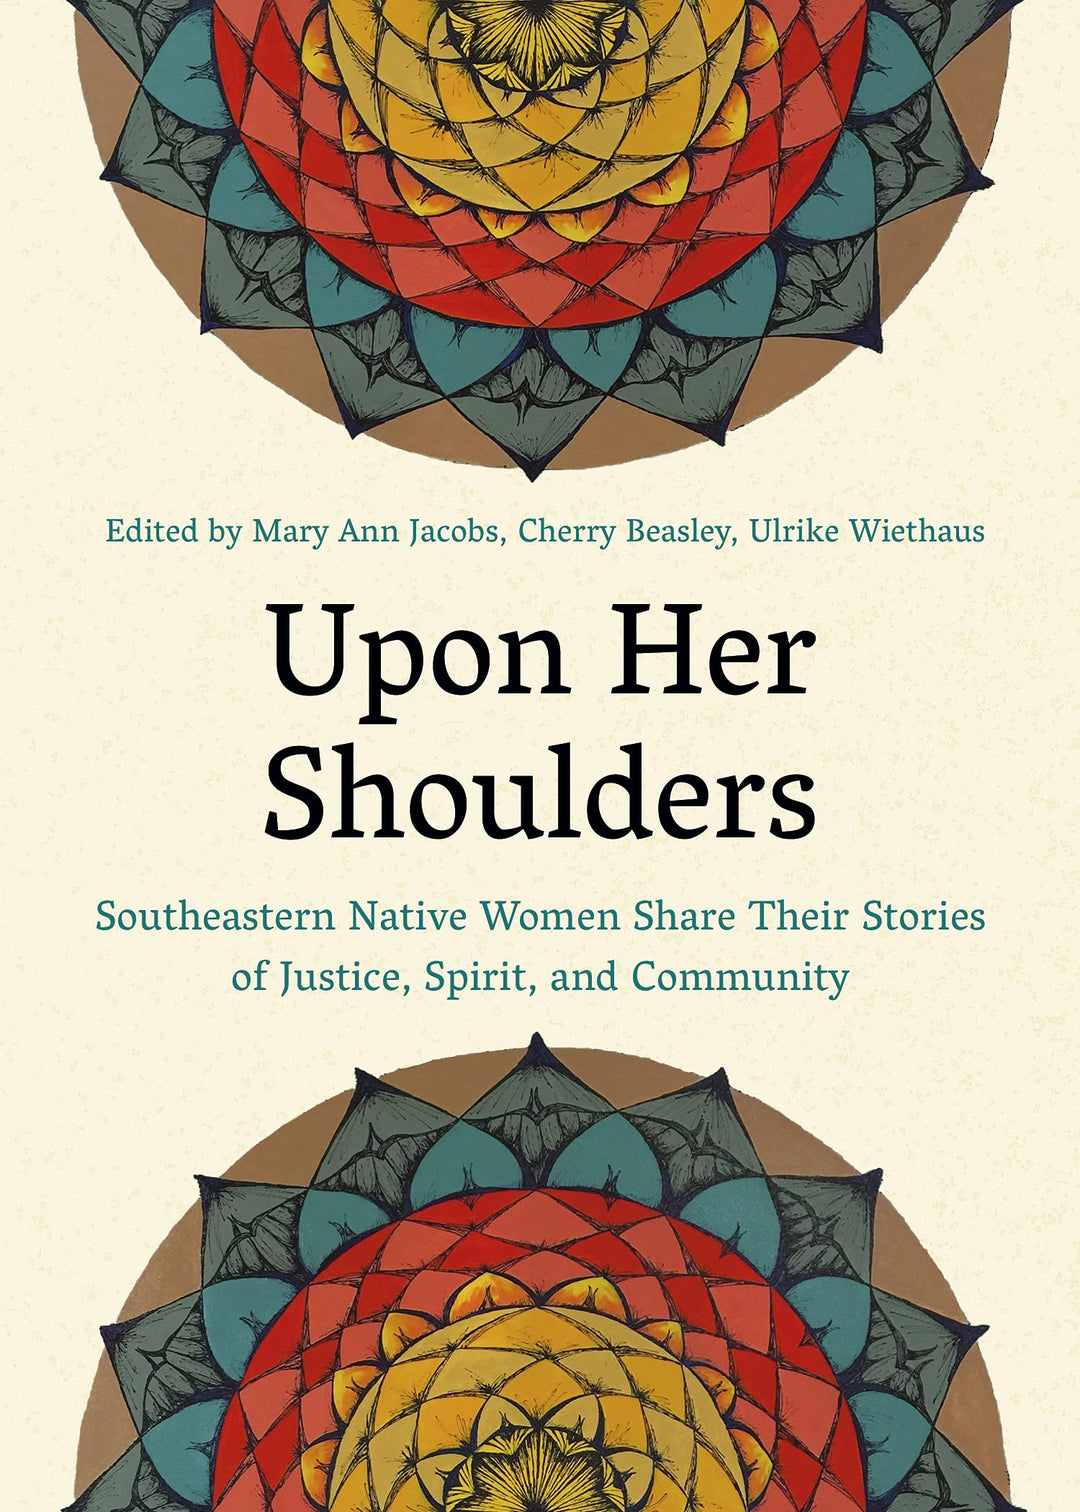 Upon Her Shoulders: Southeastern Native Women Share Their Stories of Justice, Spirit, and Community edited by Mary Ann Jacobs et al.